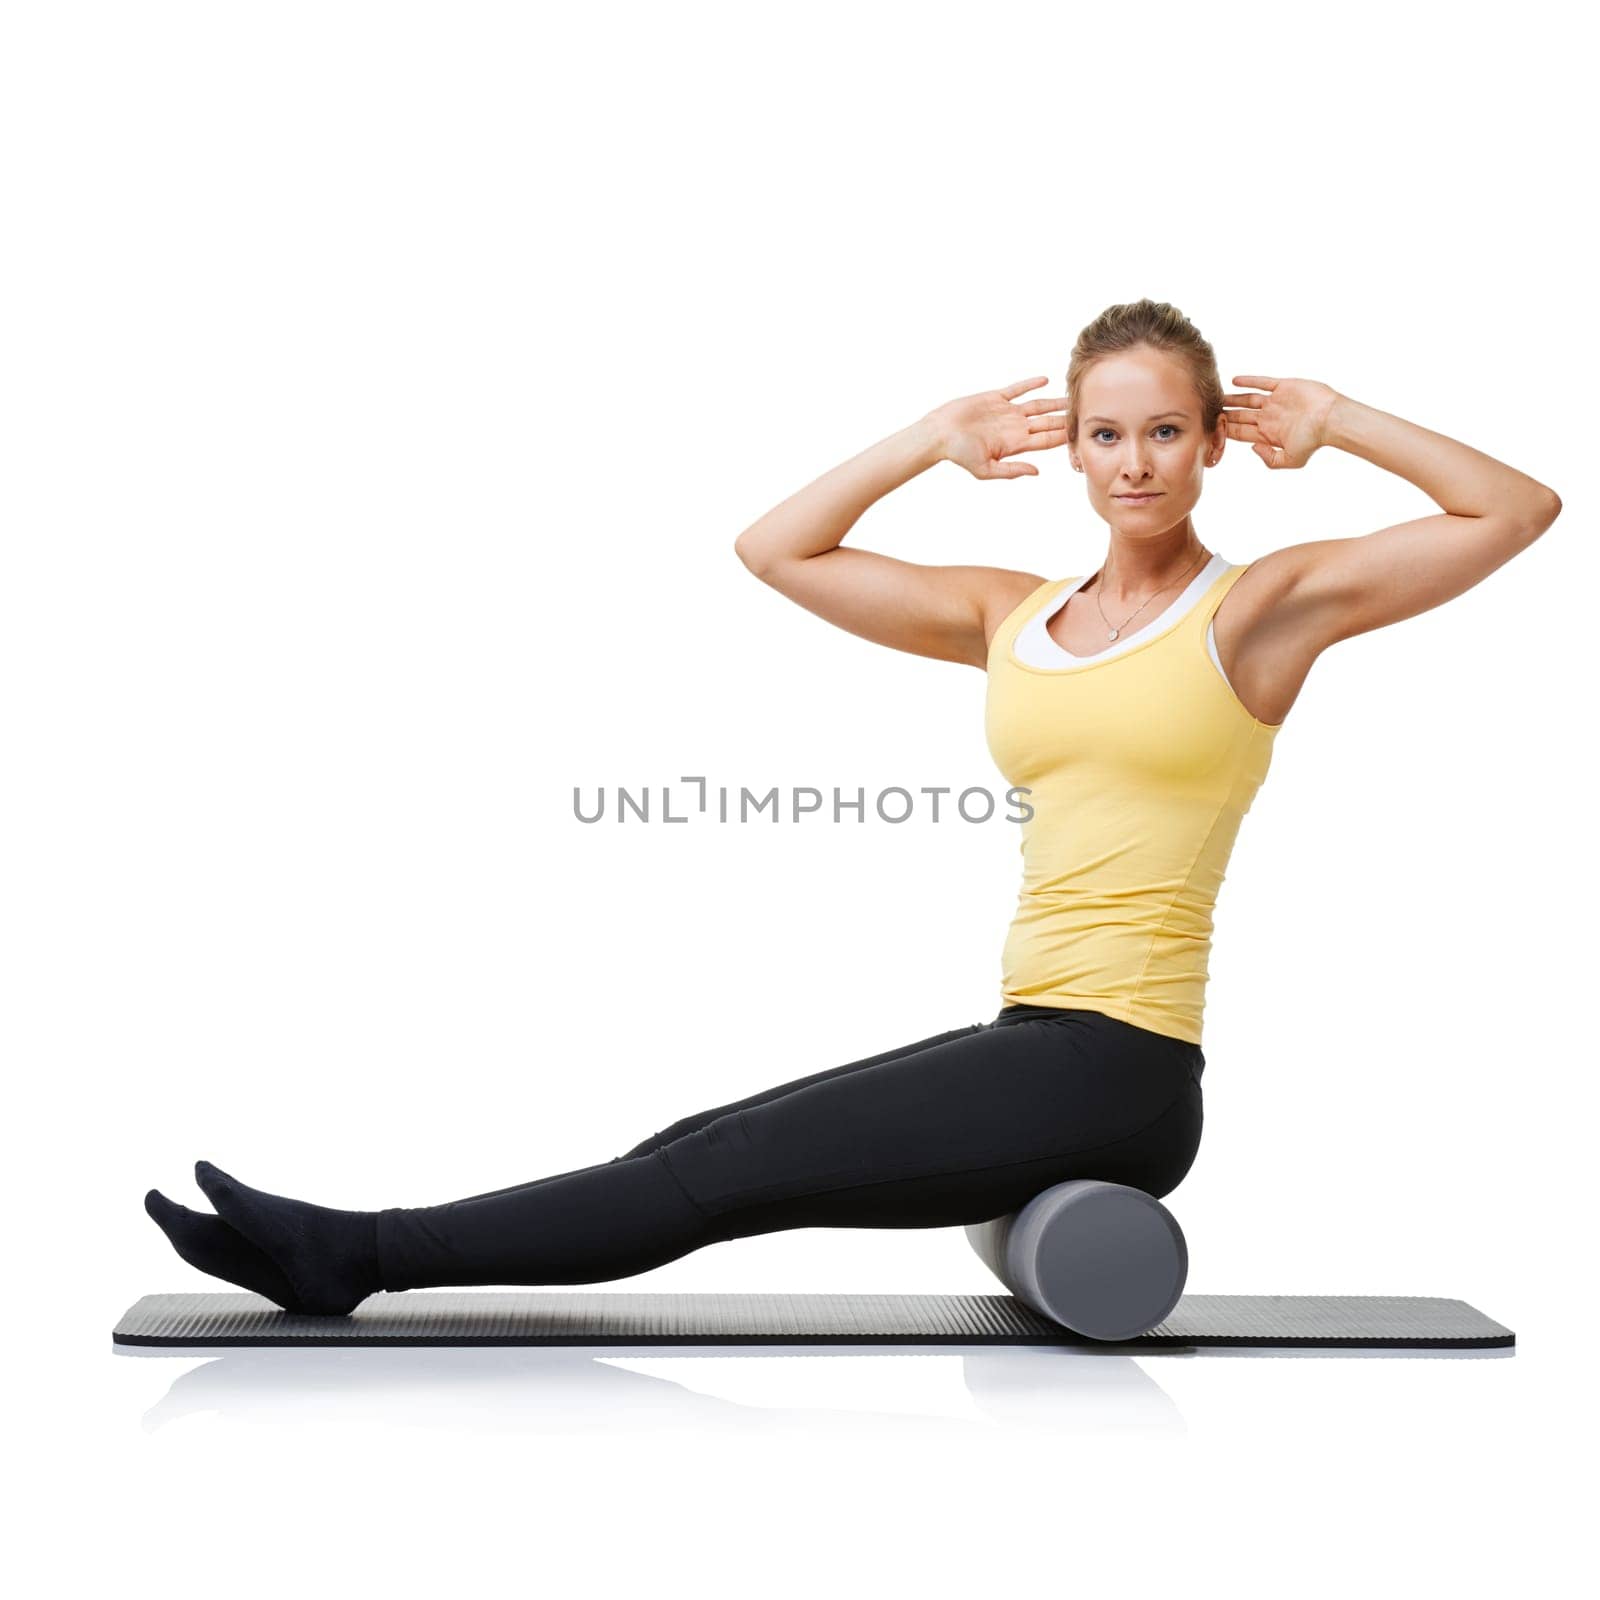 Studio workout, foam roller and portrait of woman with posture exercise, stretching or yoga performance challenge. Floor, core training or person sitting on fitness club equipment on white background.